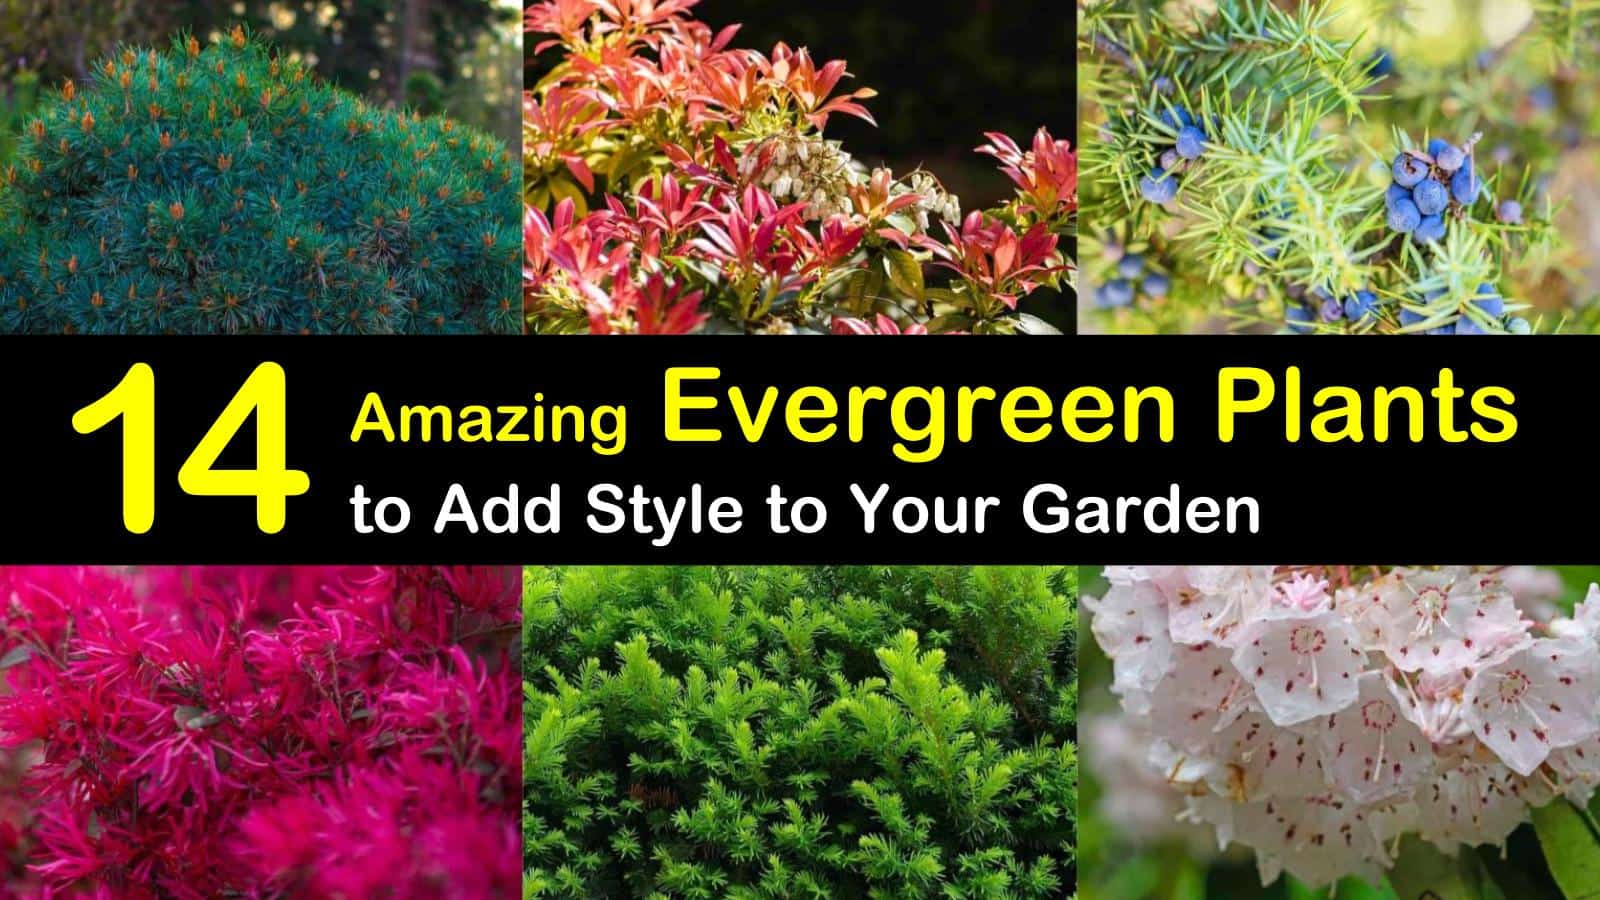 20 Amazing Evergreen Plants to Add Style to Your Garden